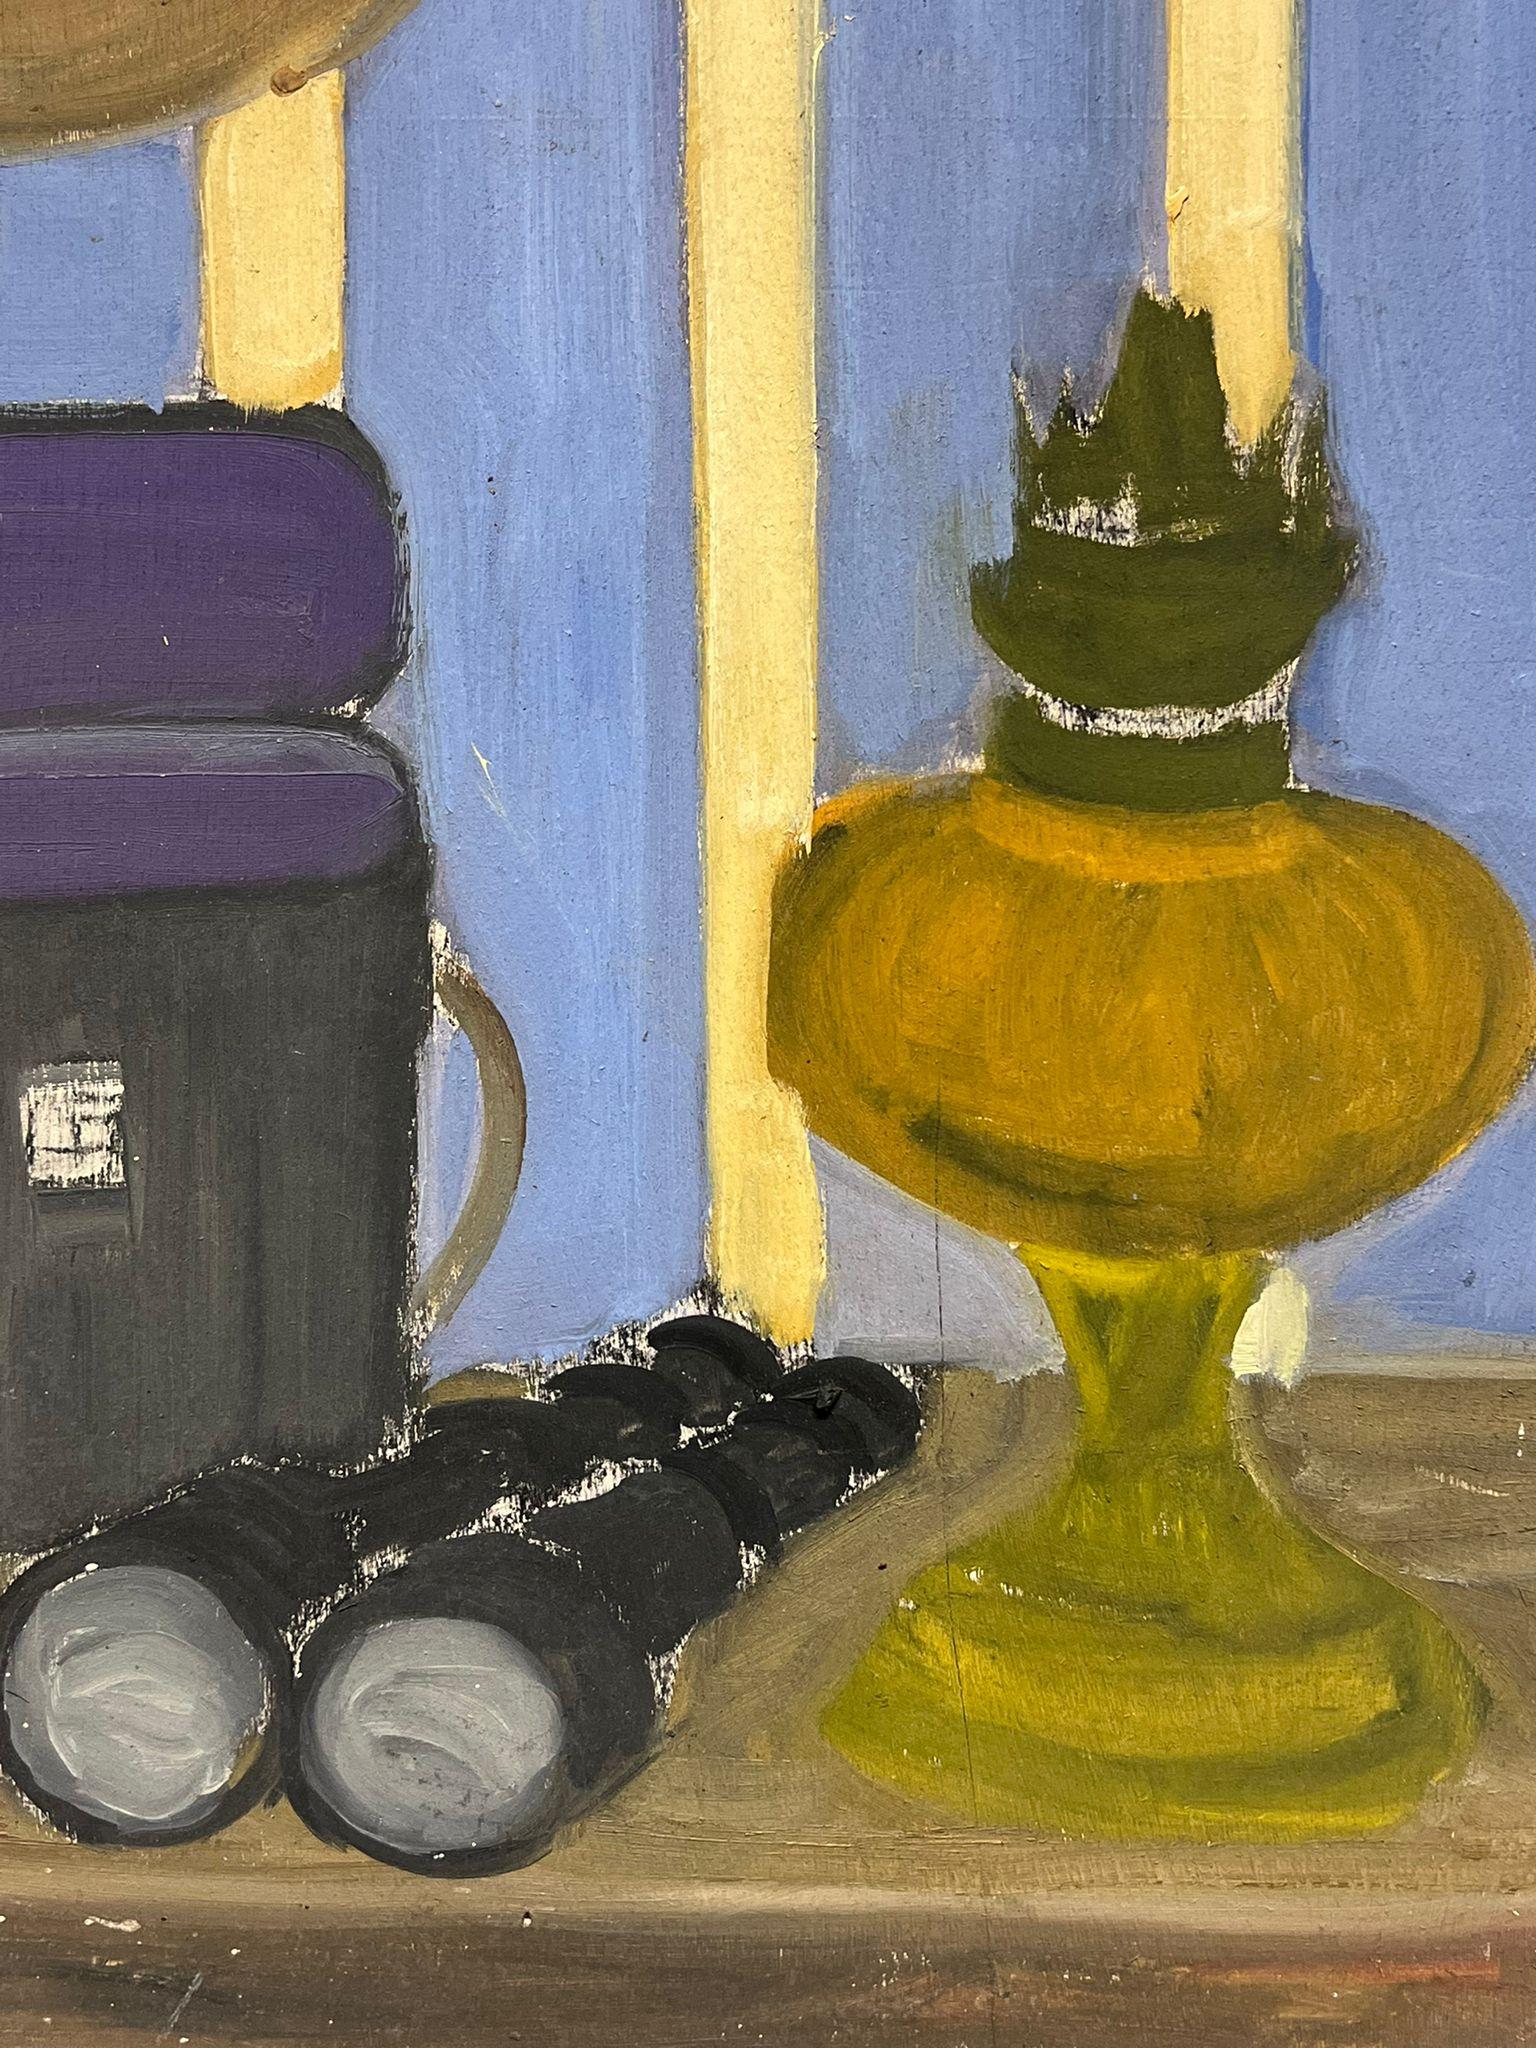 Still Life Interior
by Louise Alix (French, 1888-1980) *see notes below
provenance stamp to the back  
oil painting on board, unframed
measures: 24 high by 15 inches wide
condition: overall very good and sound, a few scuffs and marks to the surface